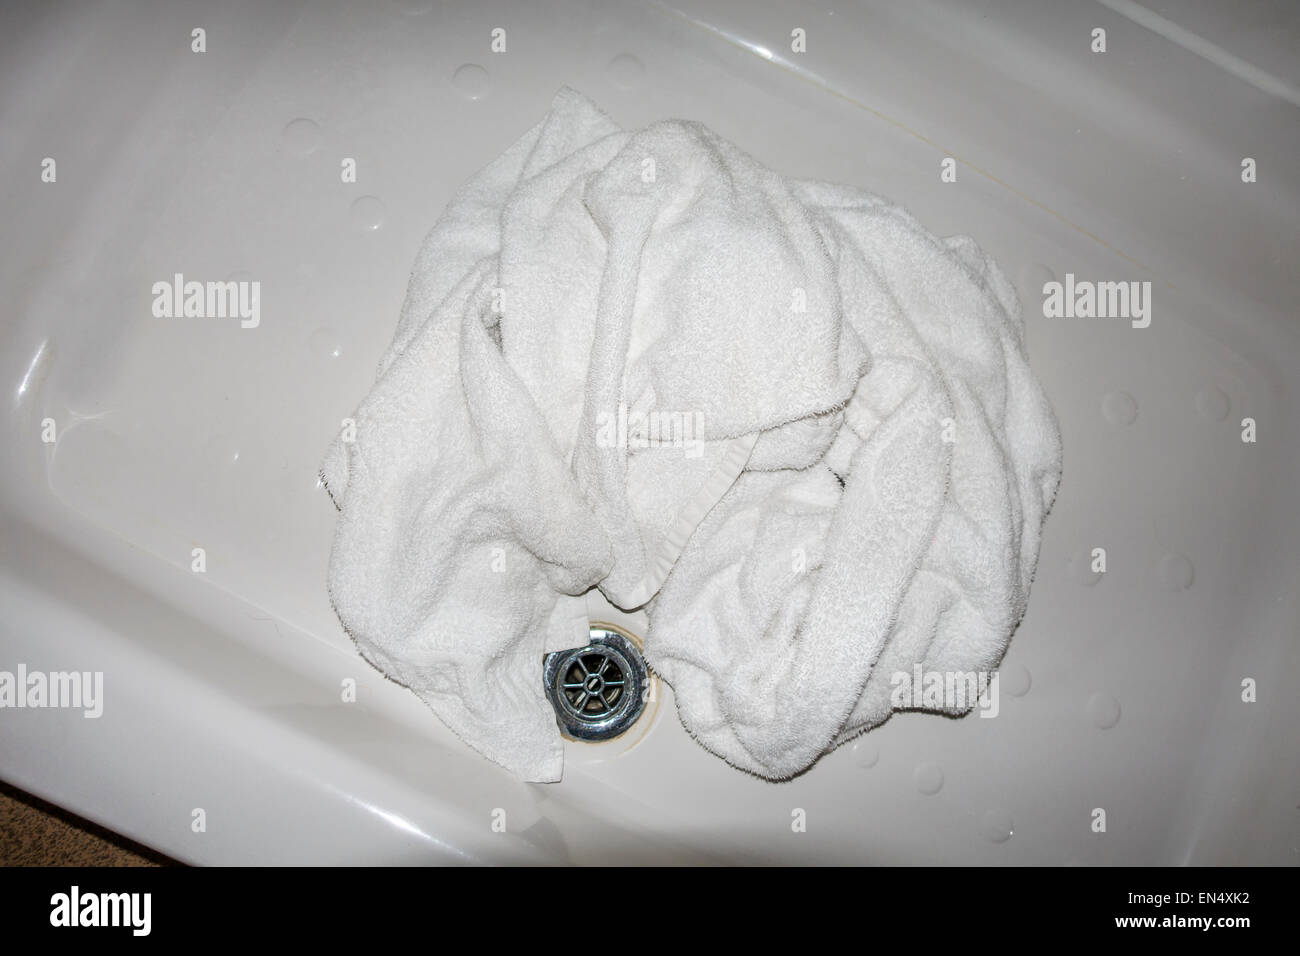 Used Hotel Towel in Shower for Changing Stock Photo